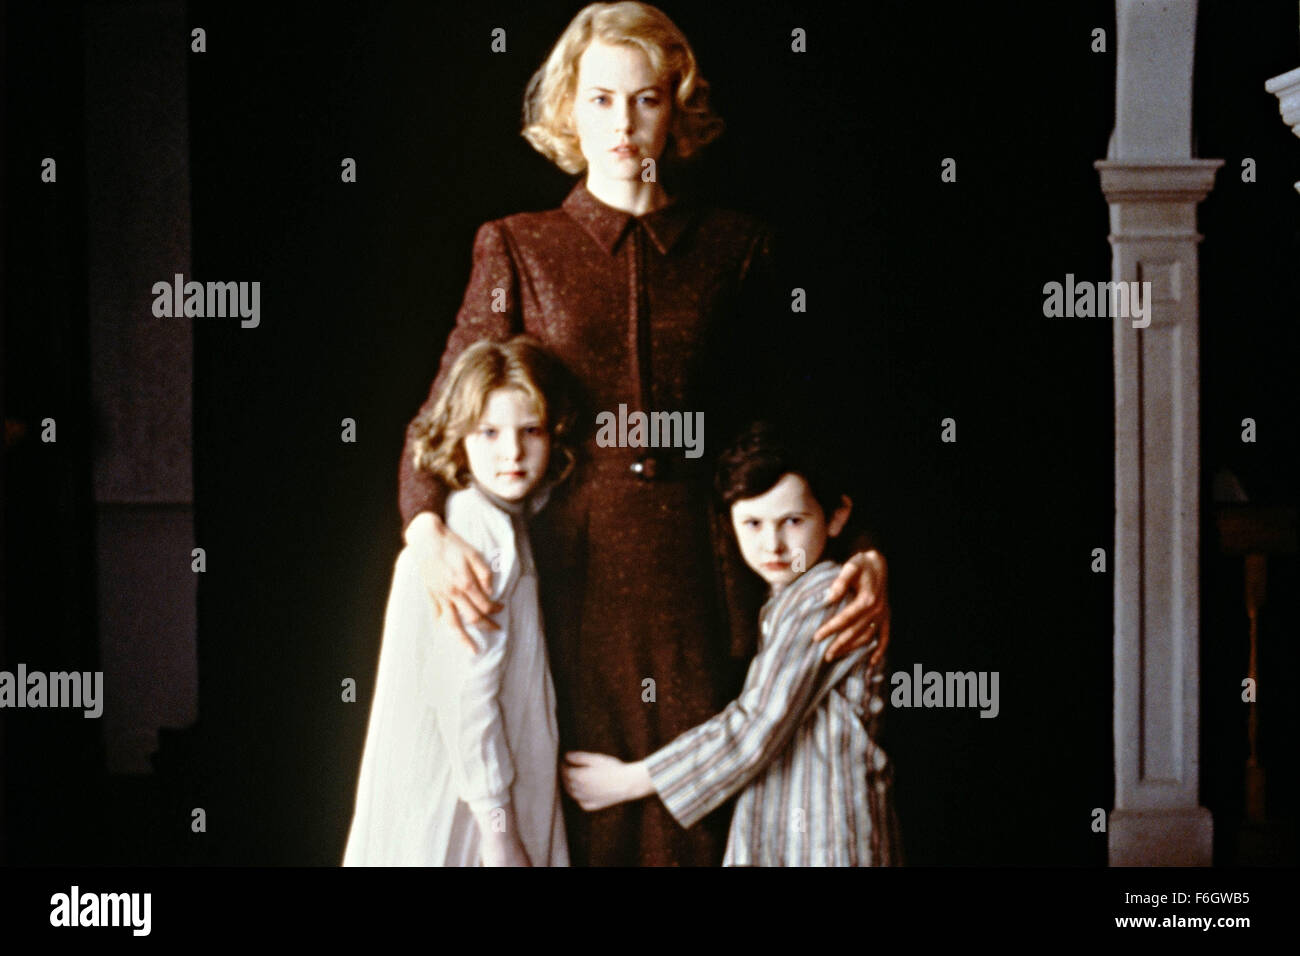 Aug 10, 2001; Los Angeles, CA, USA; Actres NICOLE KIDMAN stars as Grace Stewart in the Miramax thriller 'The Others.' Grace lives with her children ALAKINA MANN as Anne and JAMES BENTLEY as Nicholas, in a house that she is convinced is haunted. Stock Photo